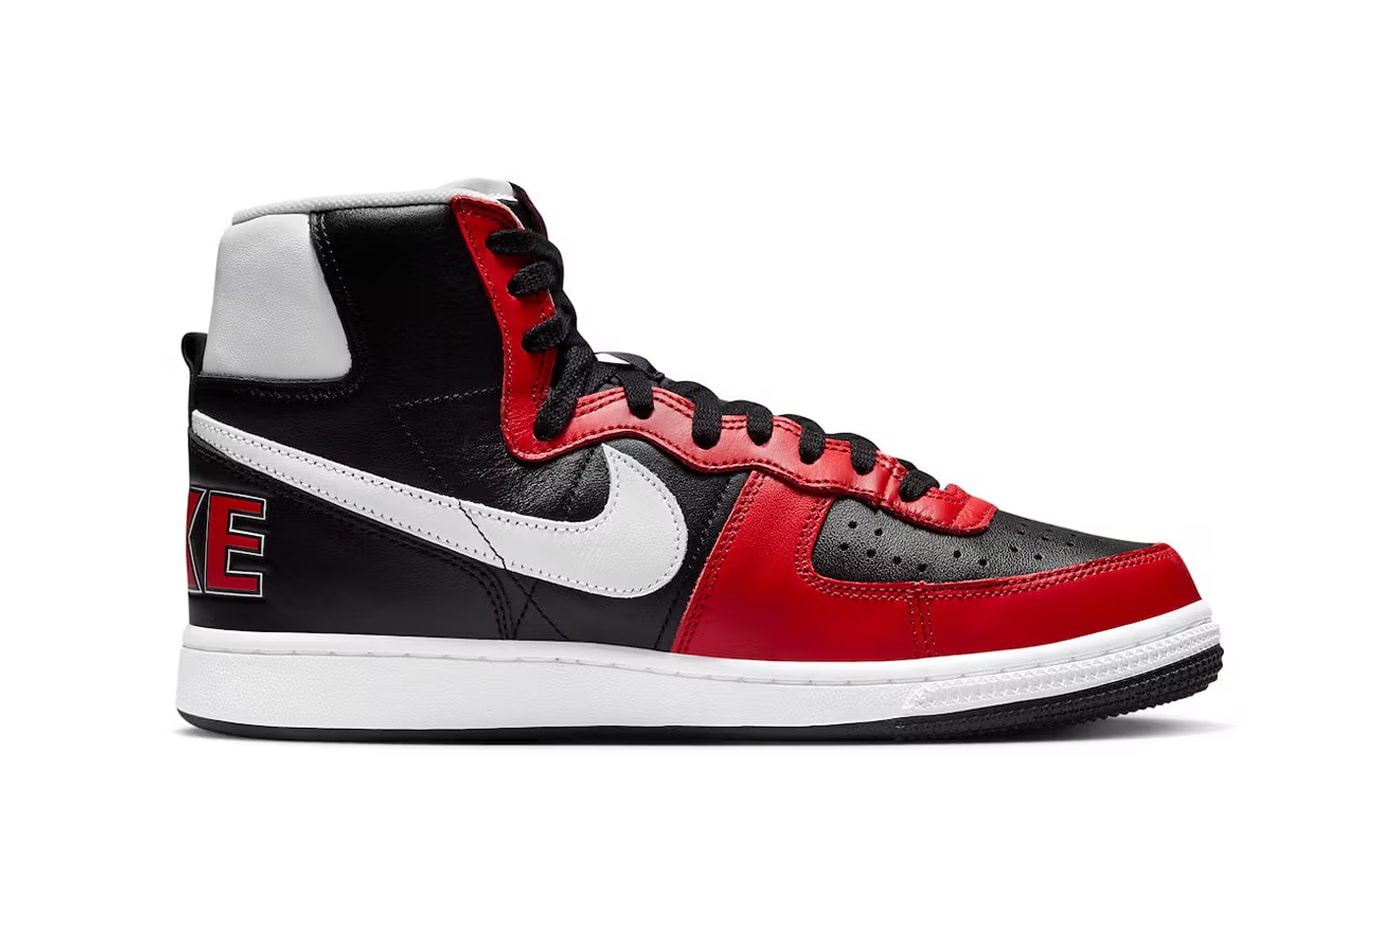 Nike Pays Homage to Portland Trail Blazers With New Terminator High Footwear